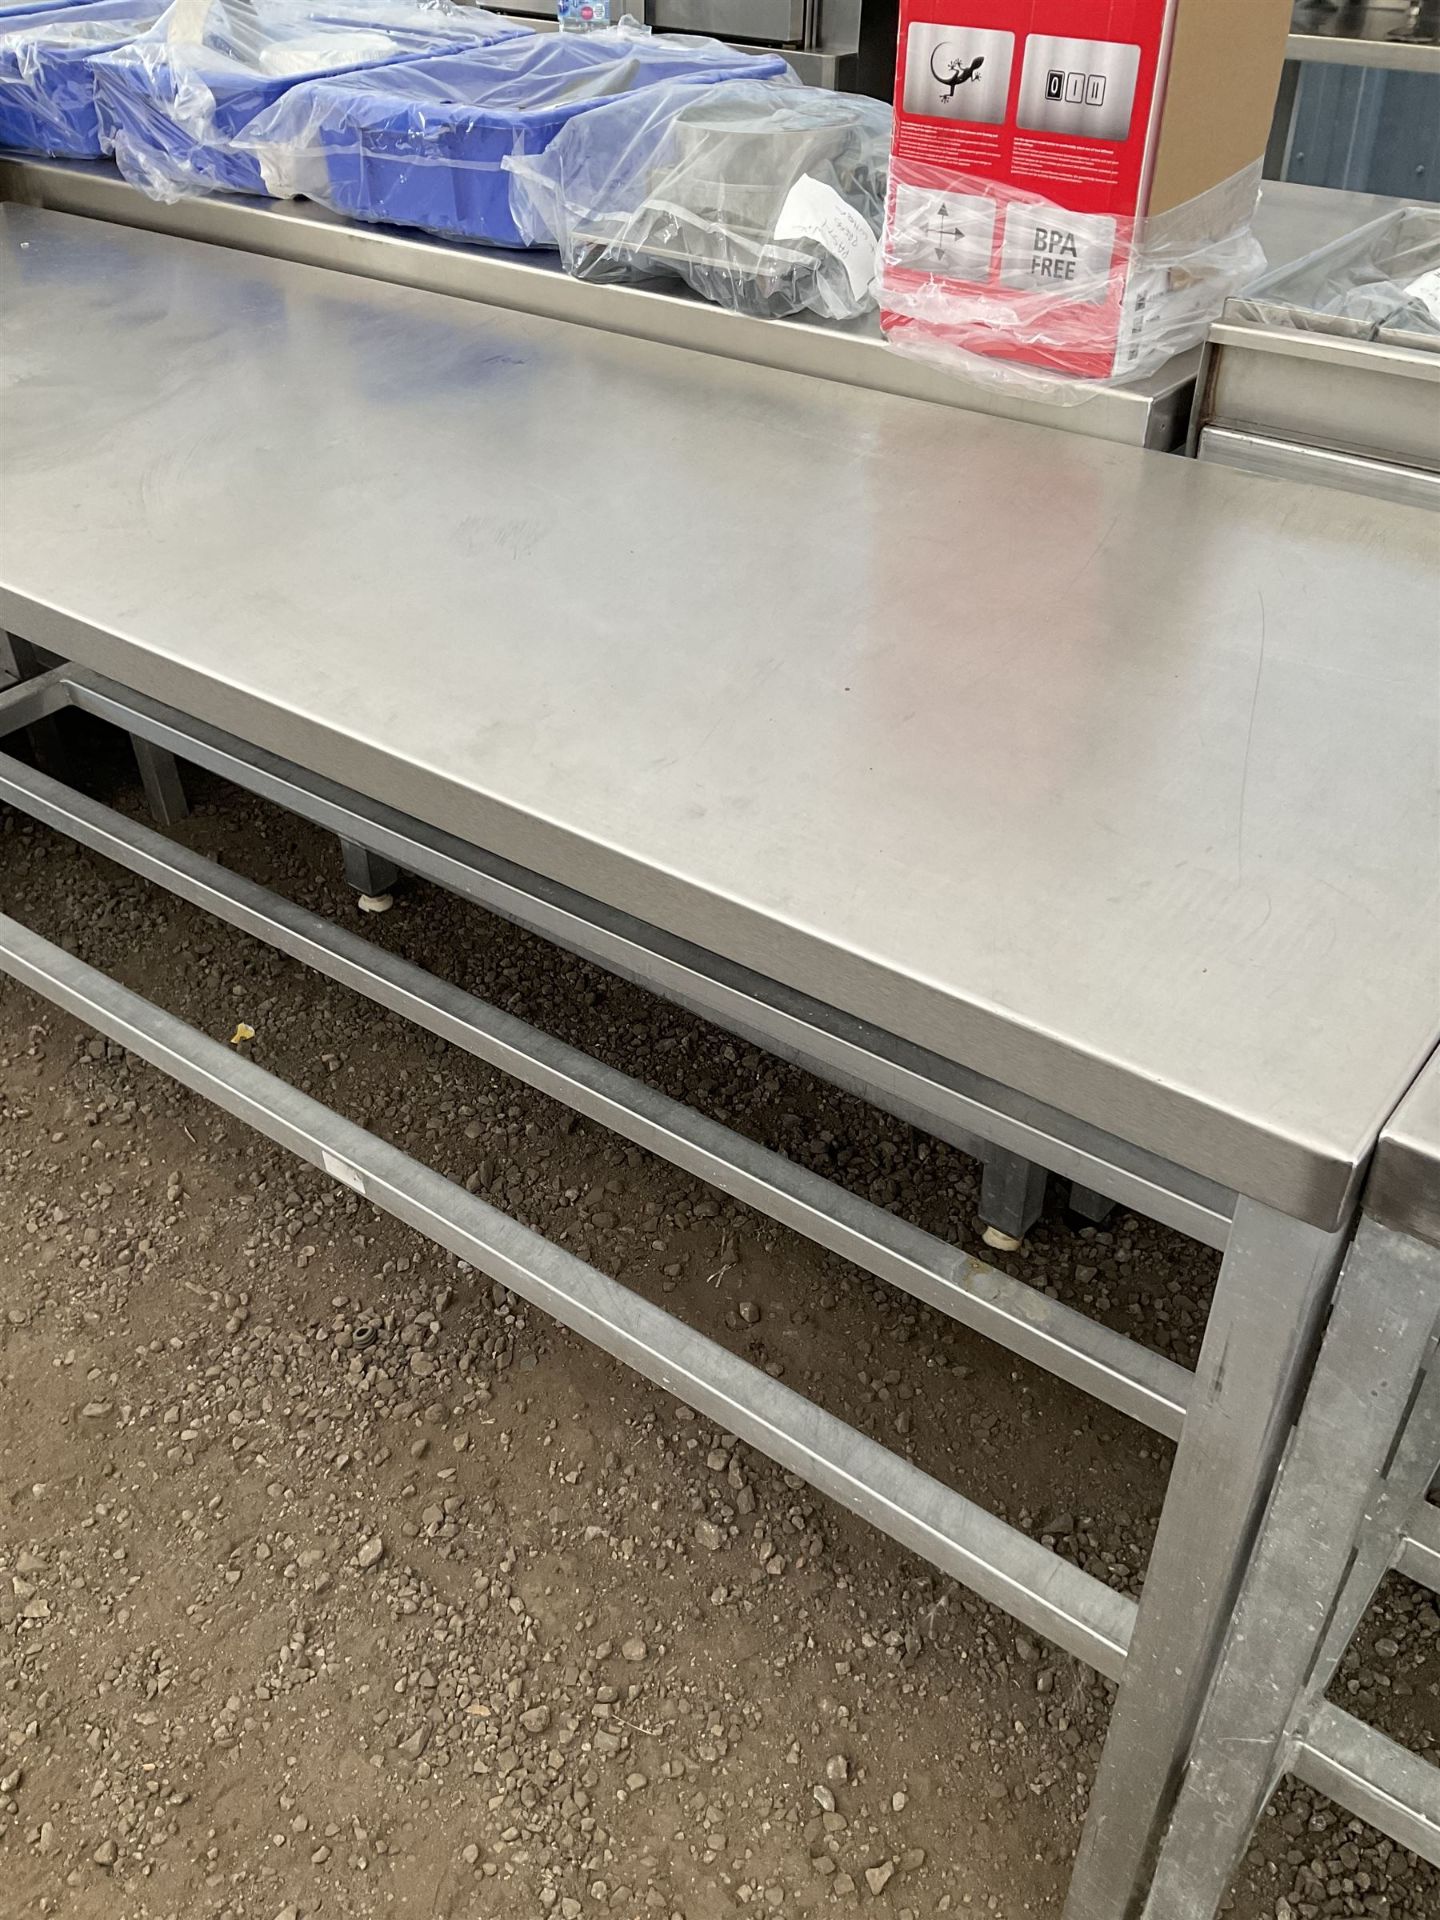 Aluminium framed preparation table with stainless steel top - Image 3 of 4